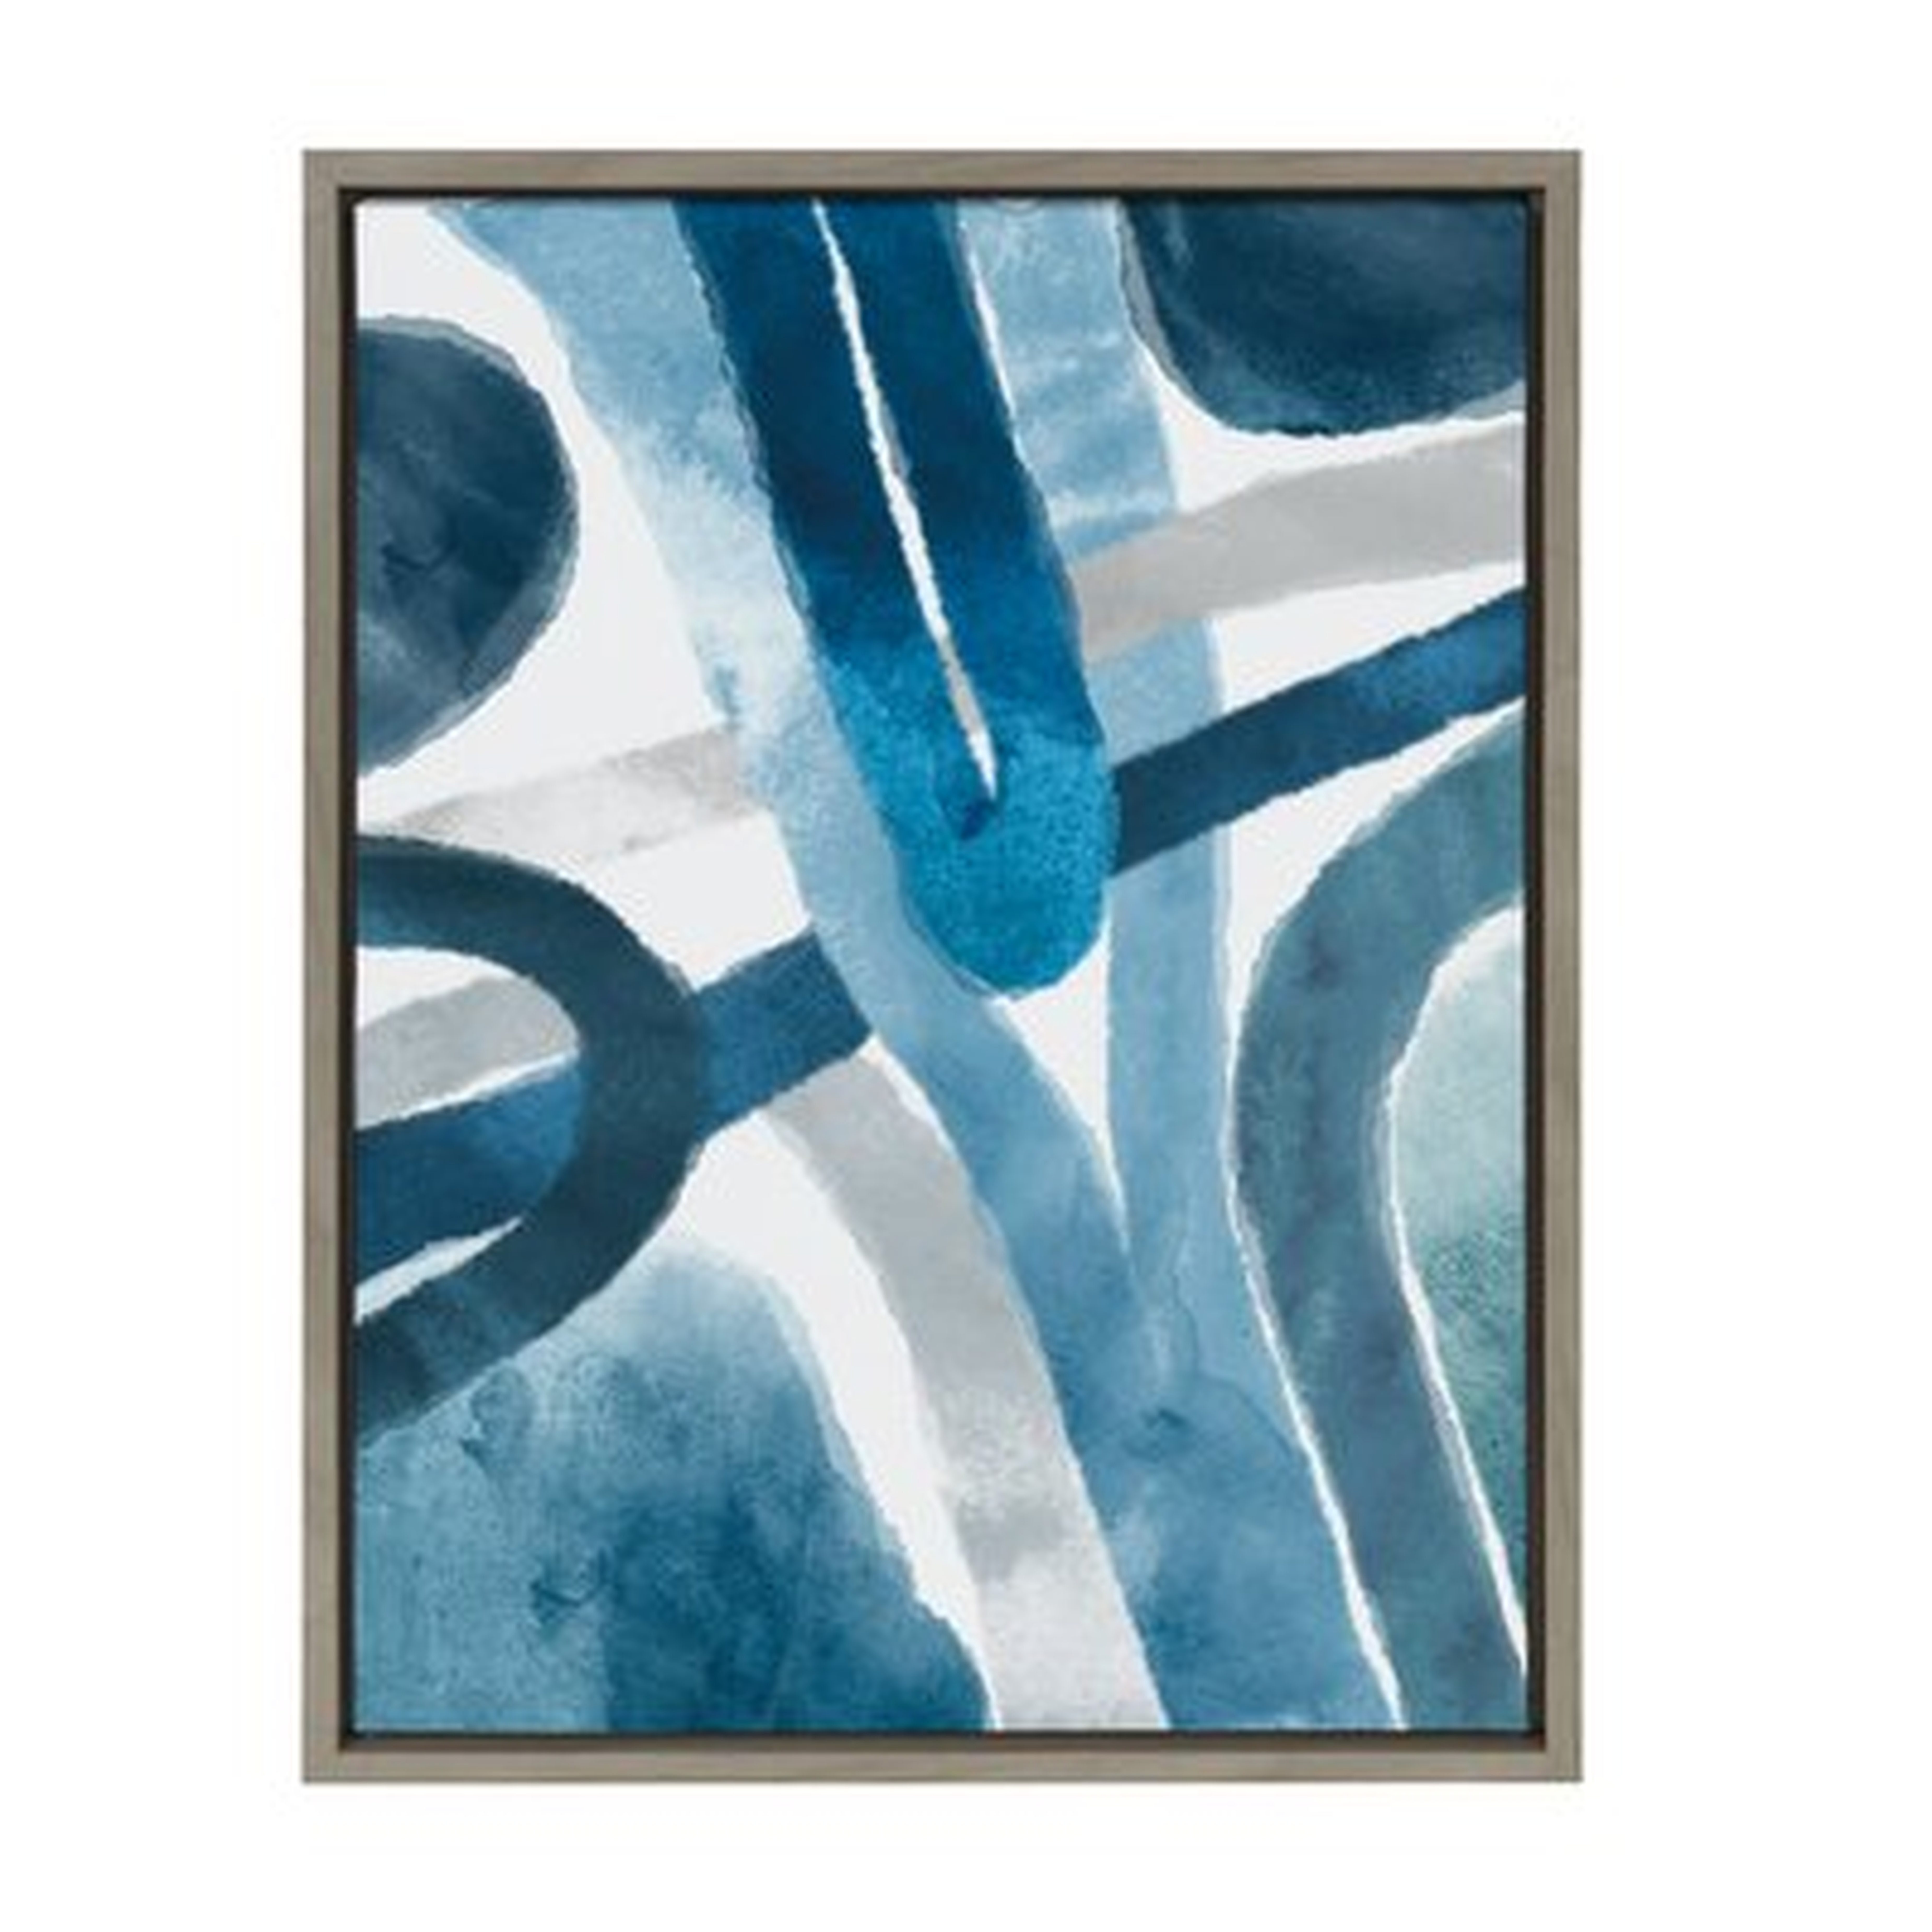 'Abstract Blue And Gray Watercolor' by Homes Designs - Floater Frame Painting Print on Canvas - Wayfair